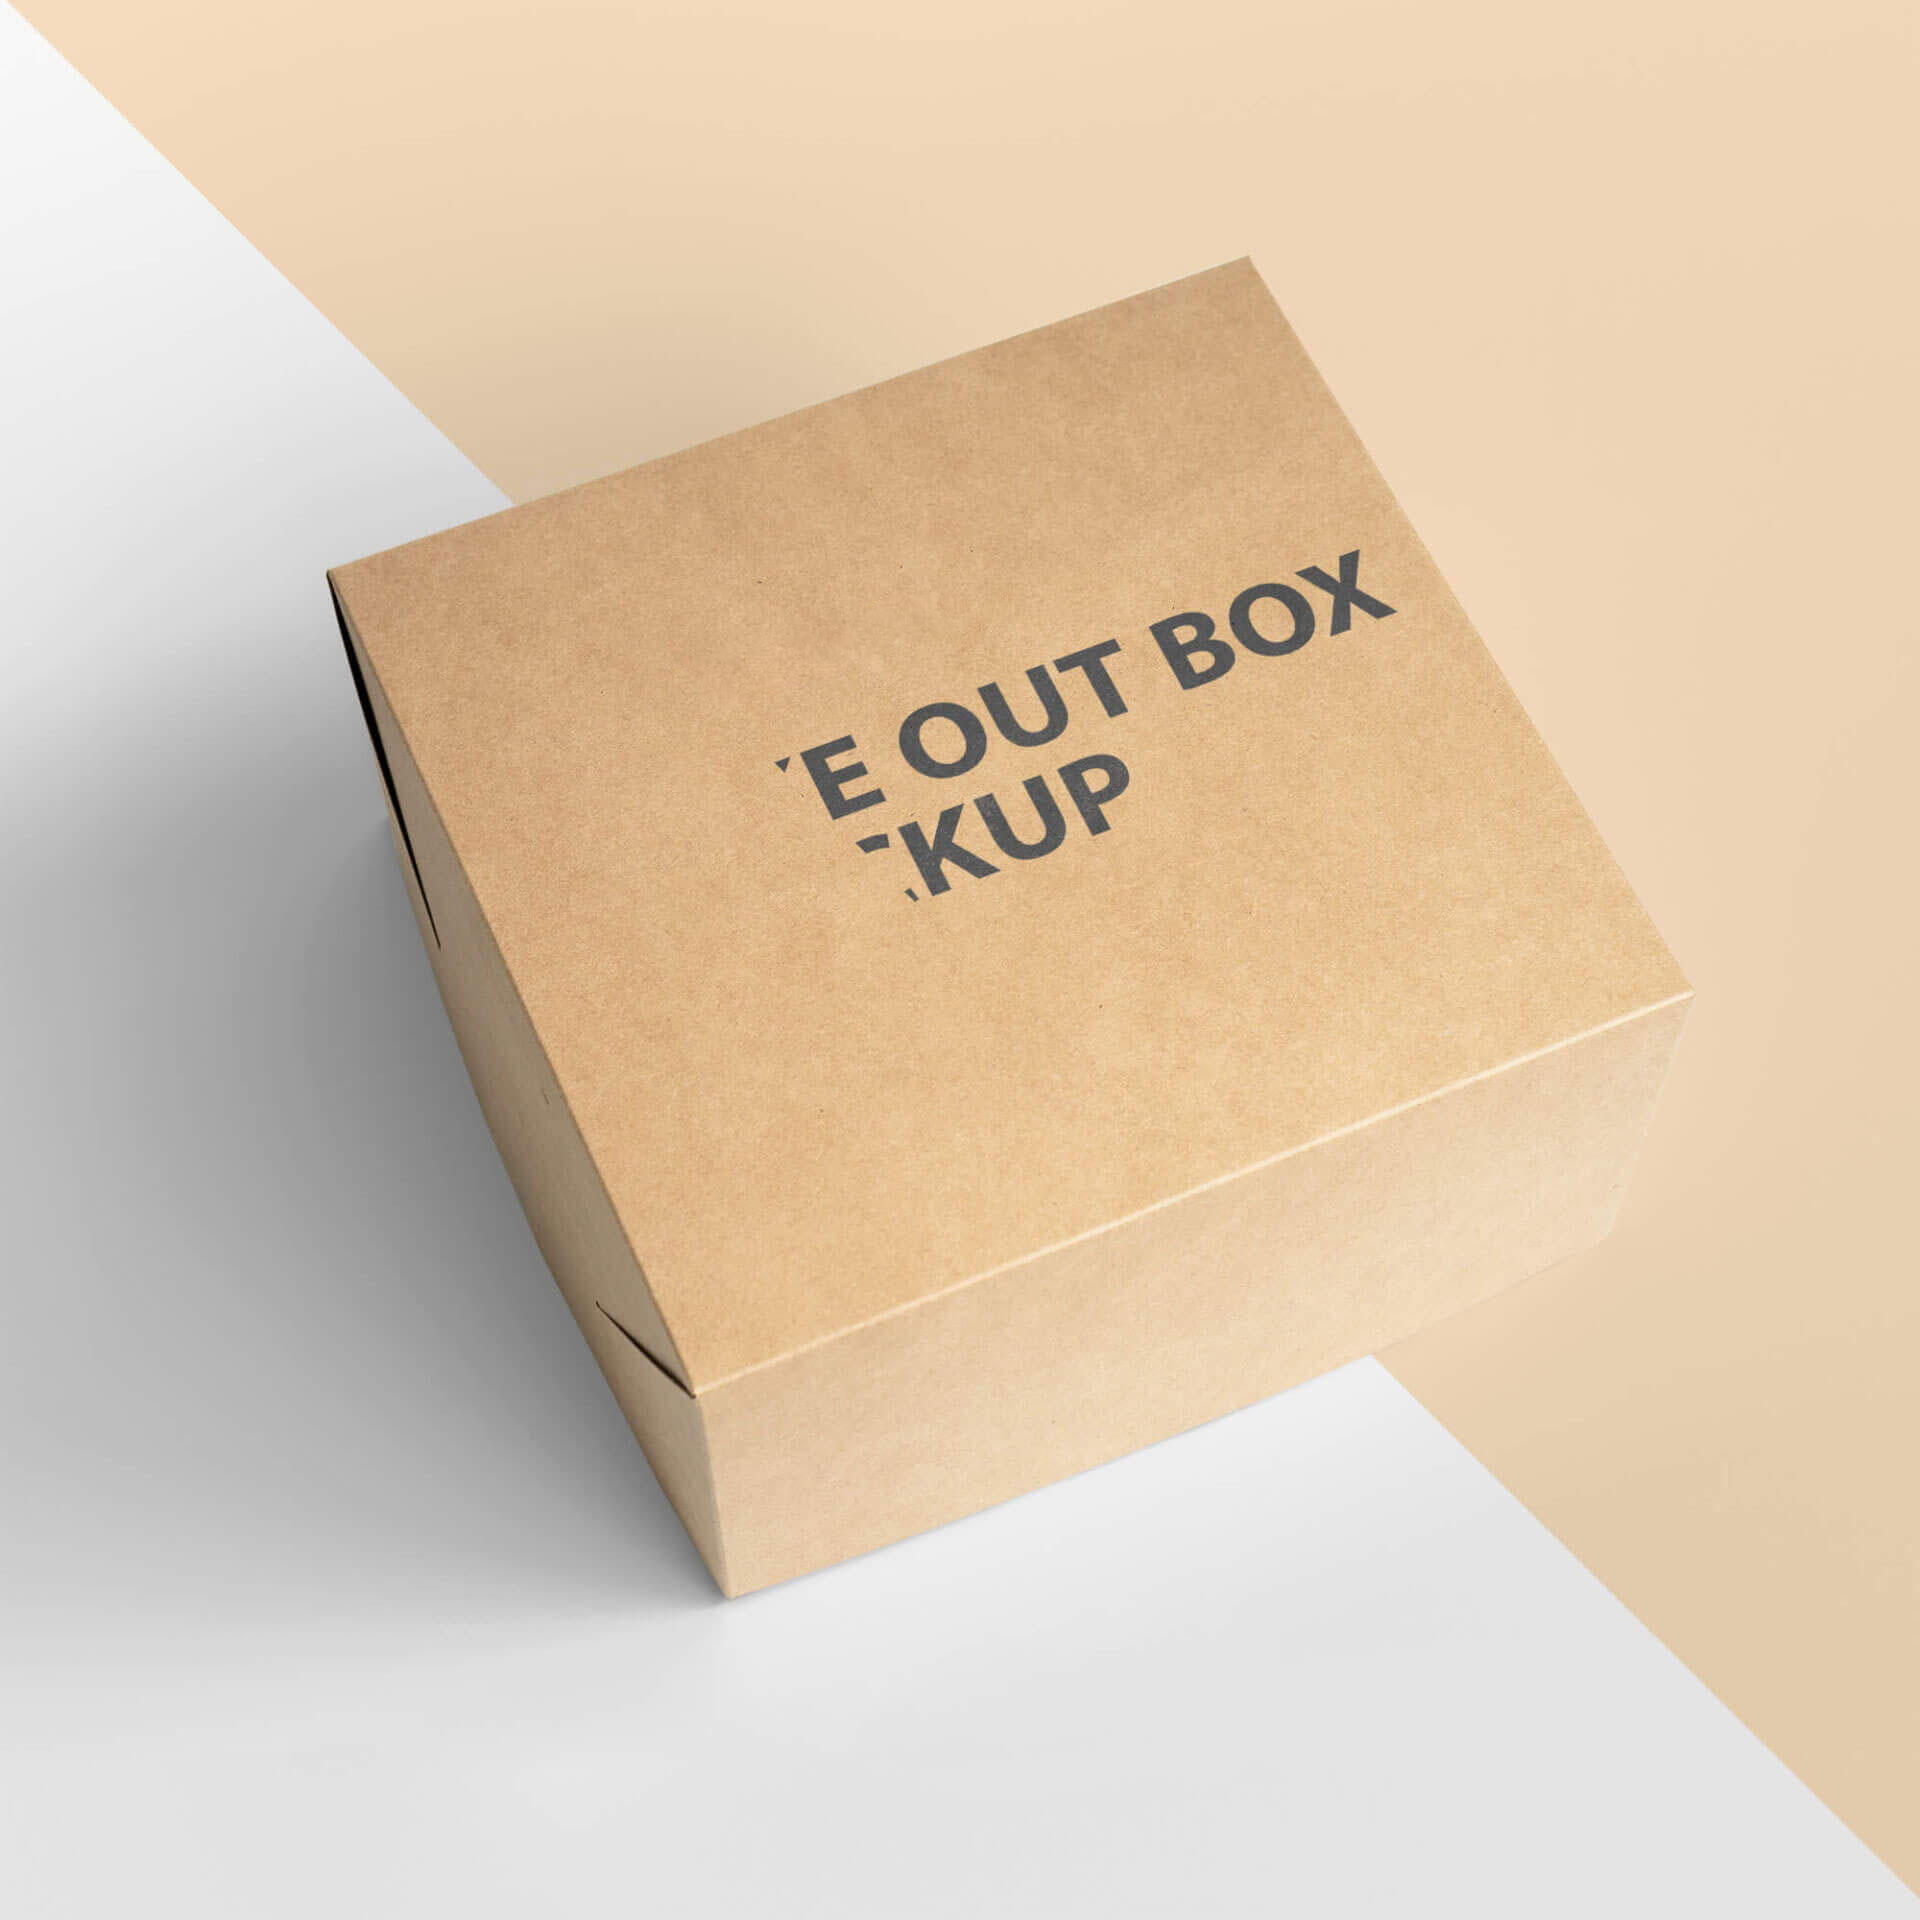 Food Pastry Boxes Vol.1: Cake Donut Pastry Packaging Mockups #Ad #Cake,  #SPONSORED, #Vol, #Pack… | Bakery packaging design, Cake boxes packaging,  Food box packaging